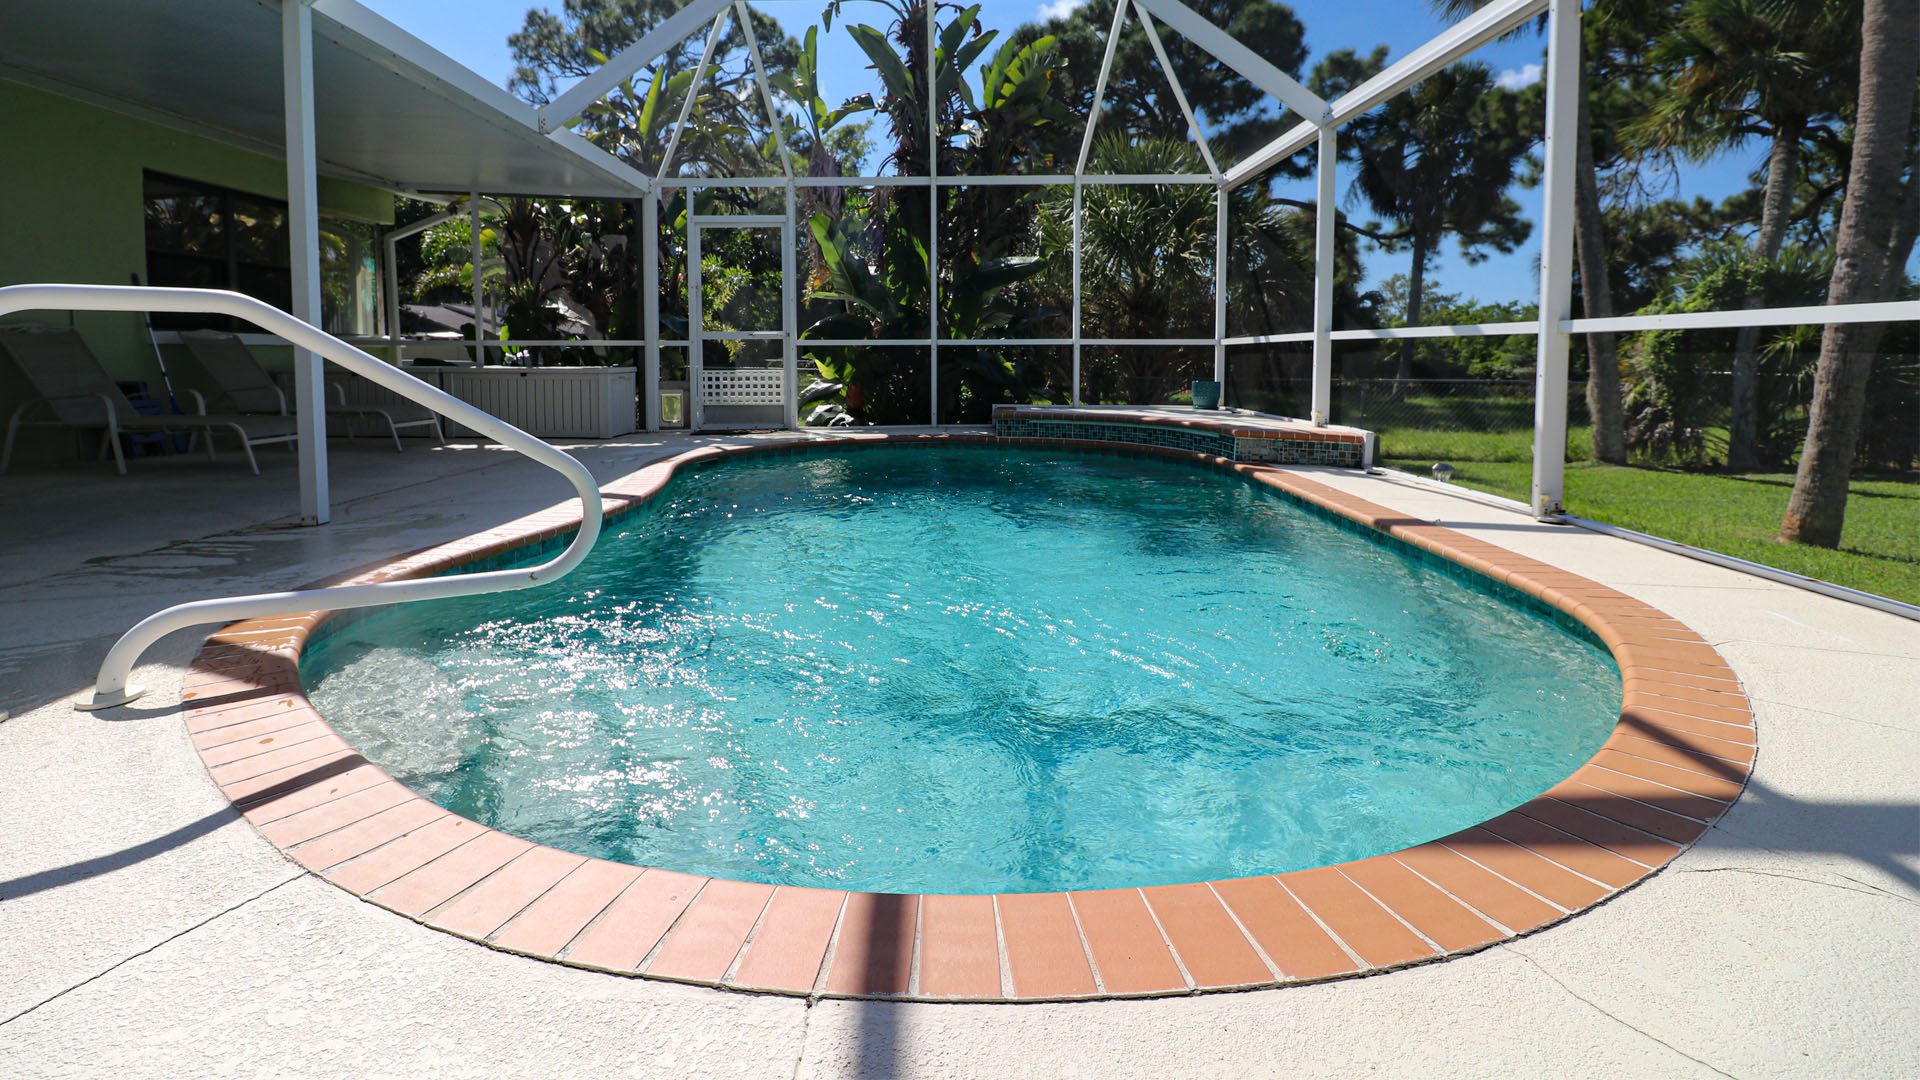 Soak up the sunshine in the west facing pool